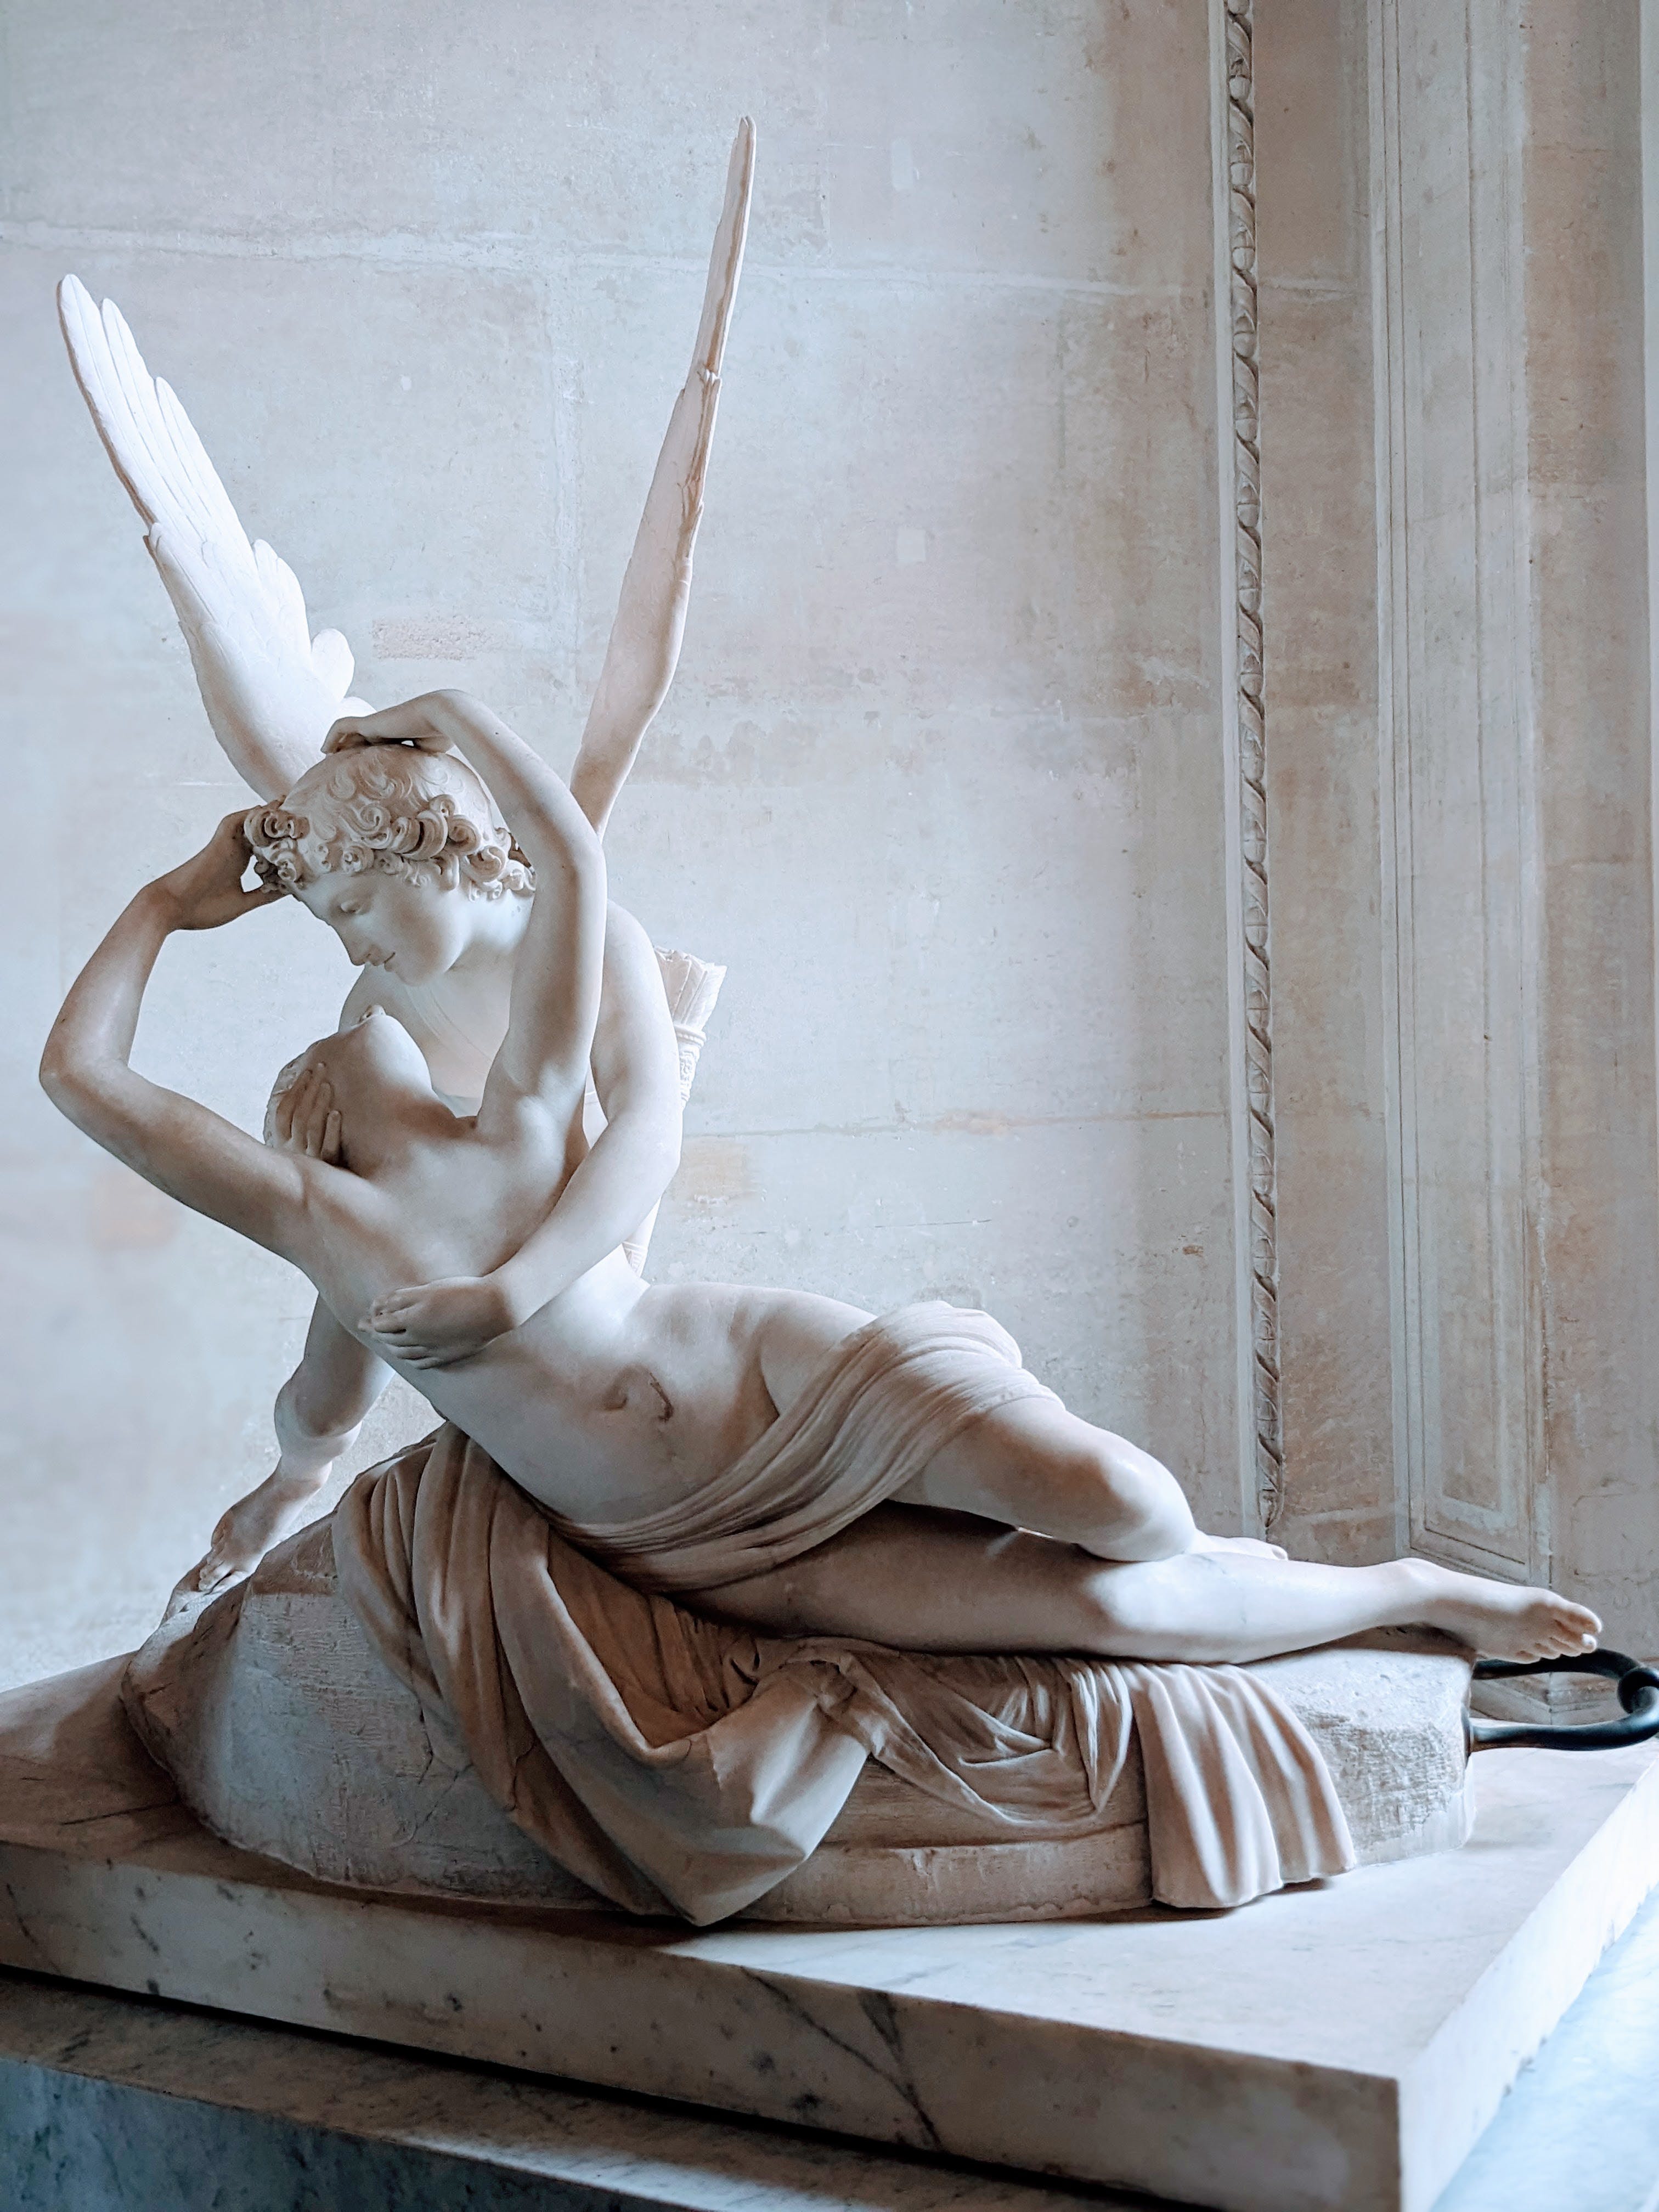 The Psyche Revived by Cupid's Kiss